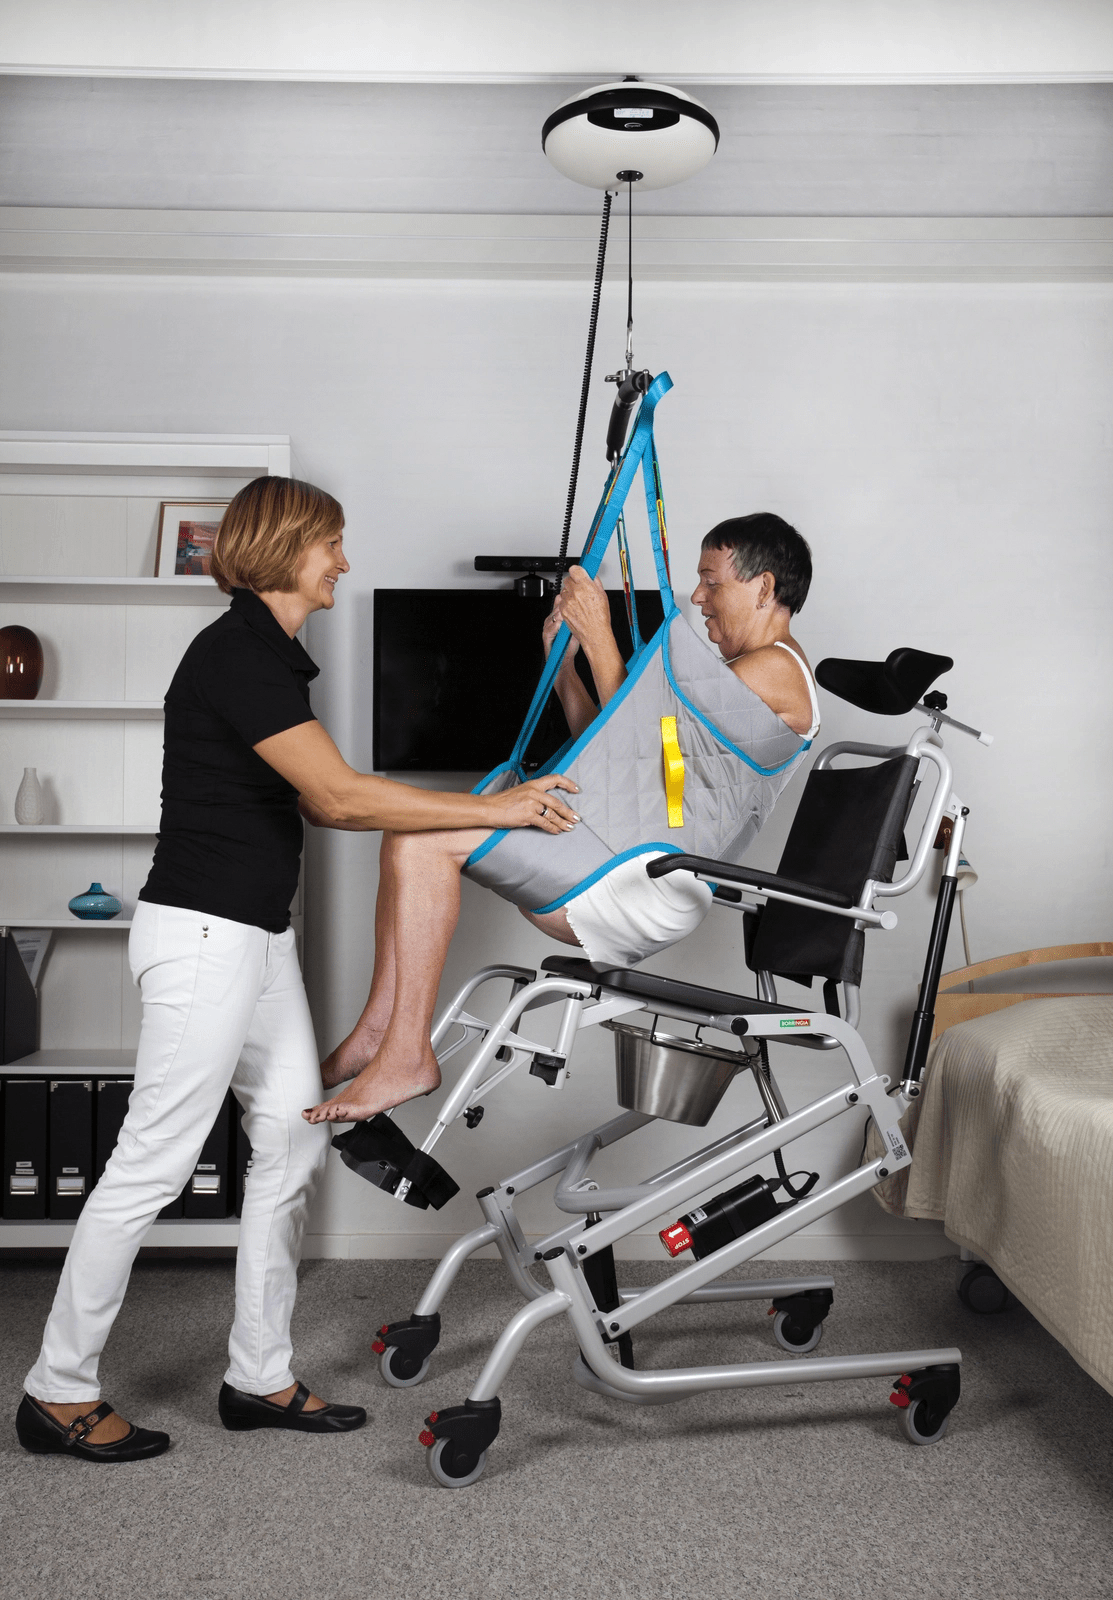 Patient and carer using a ceiling hoist